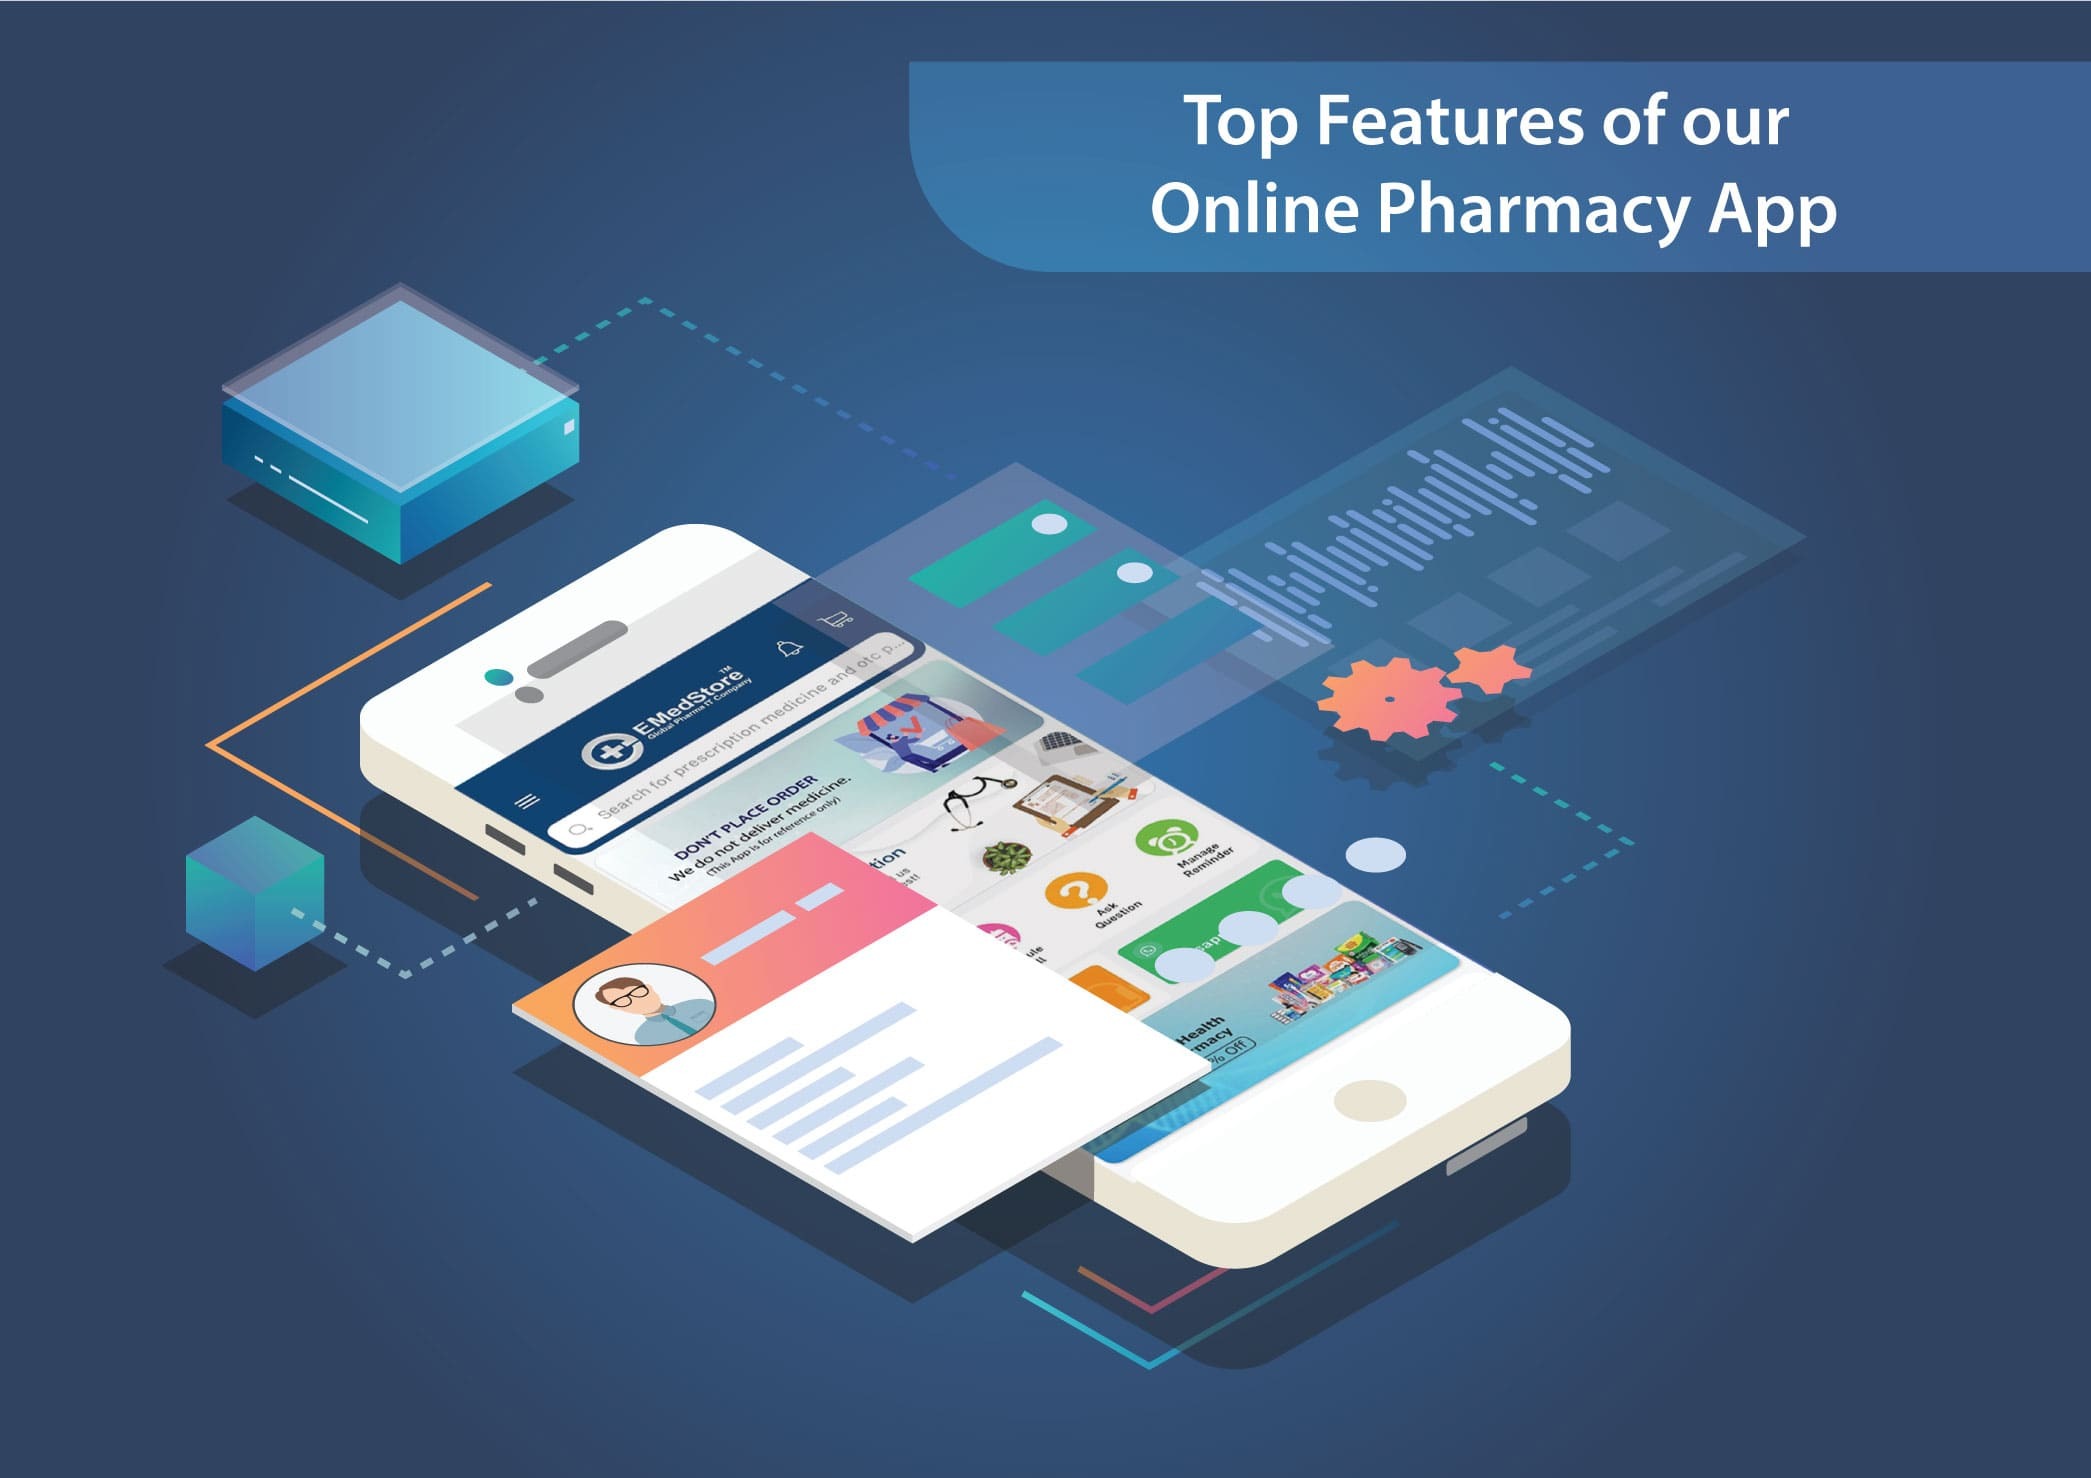 Top Features of our Online Pharmacy App